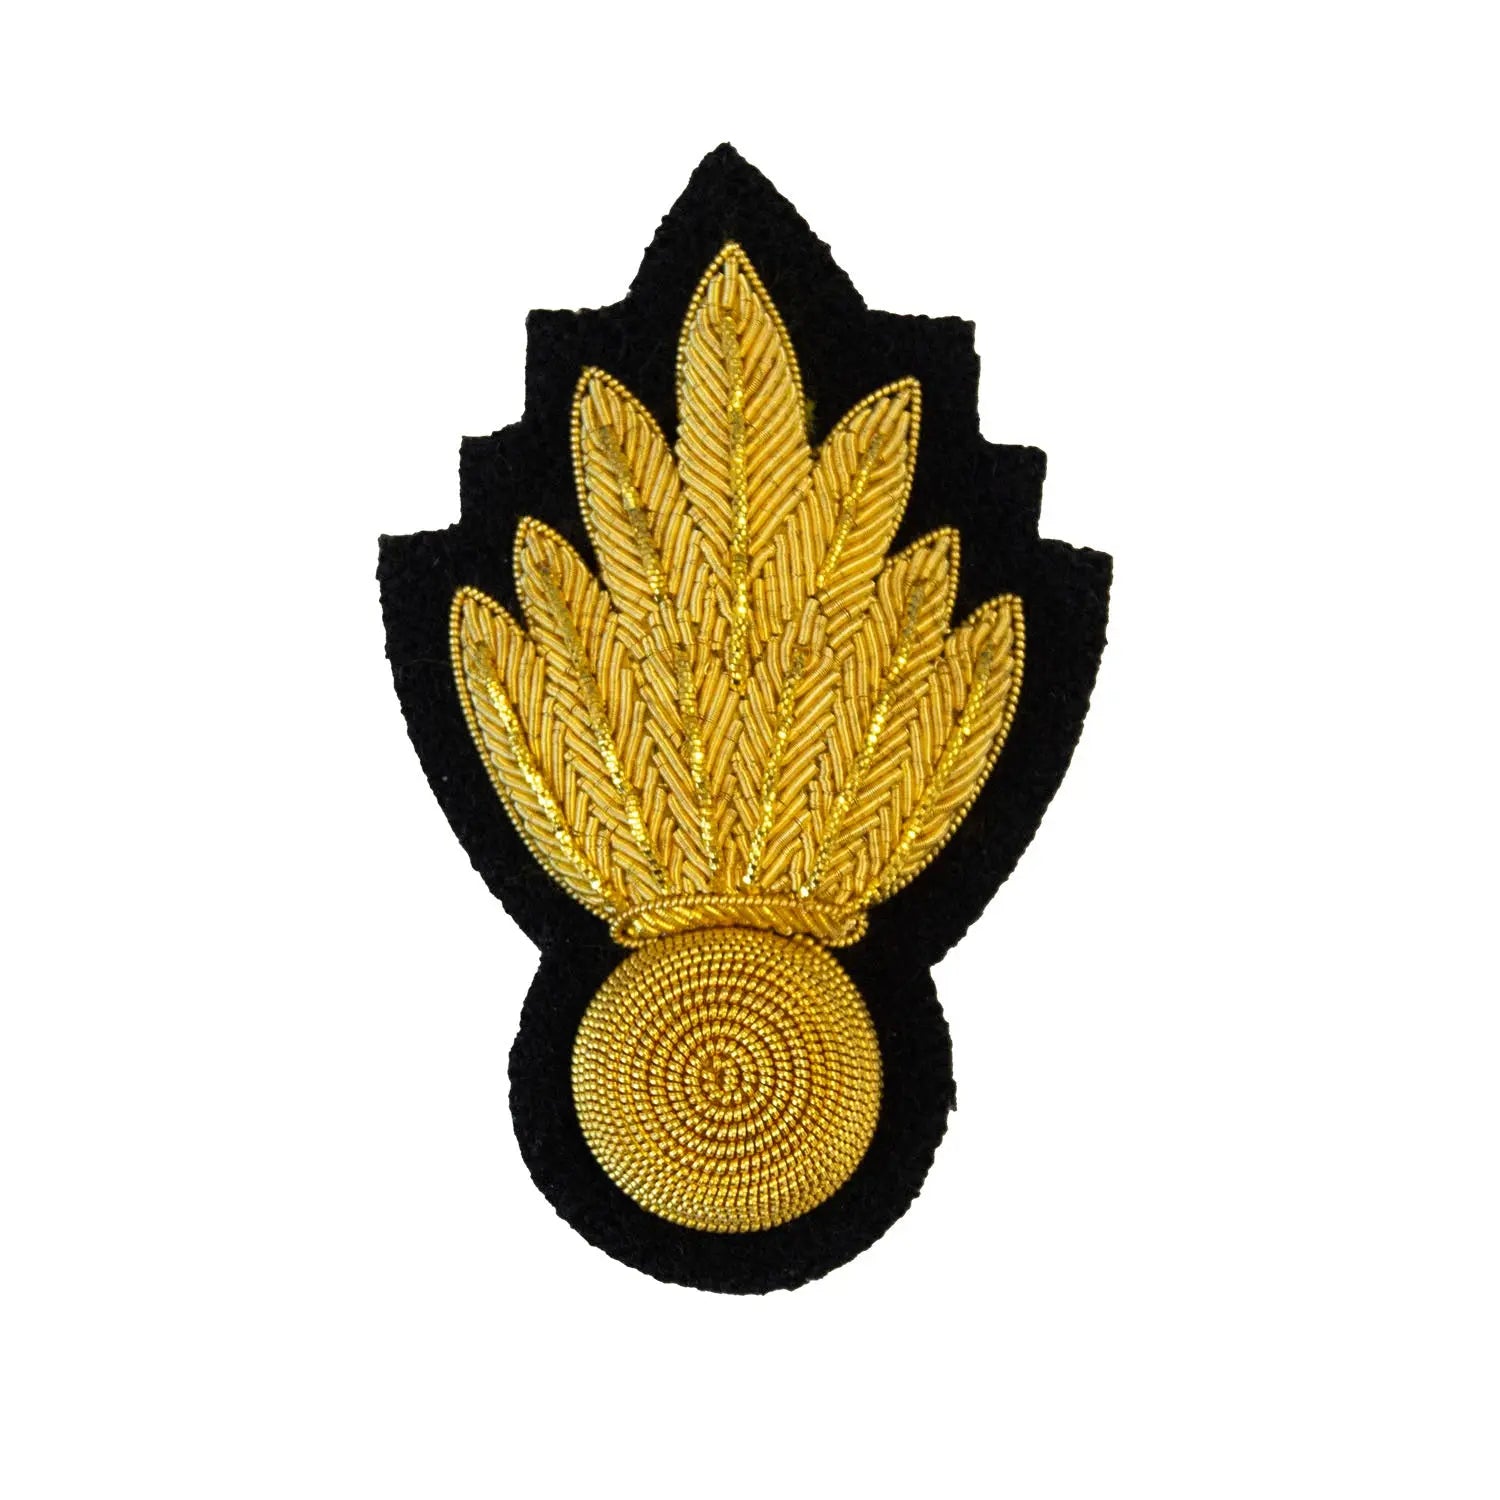 Grenade Badge for Sergeants and Staff Sergreants (SSgts) in the Royal Engineers (Including Gurkha) British Army Badge wyedean